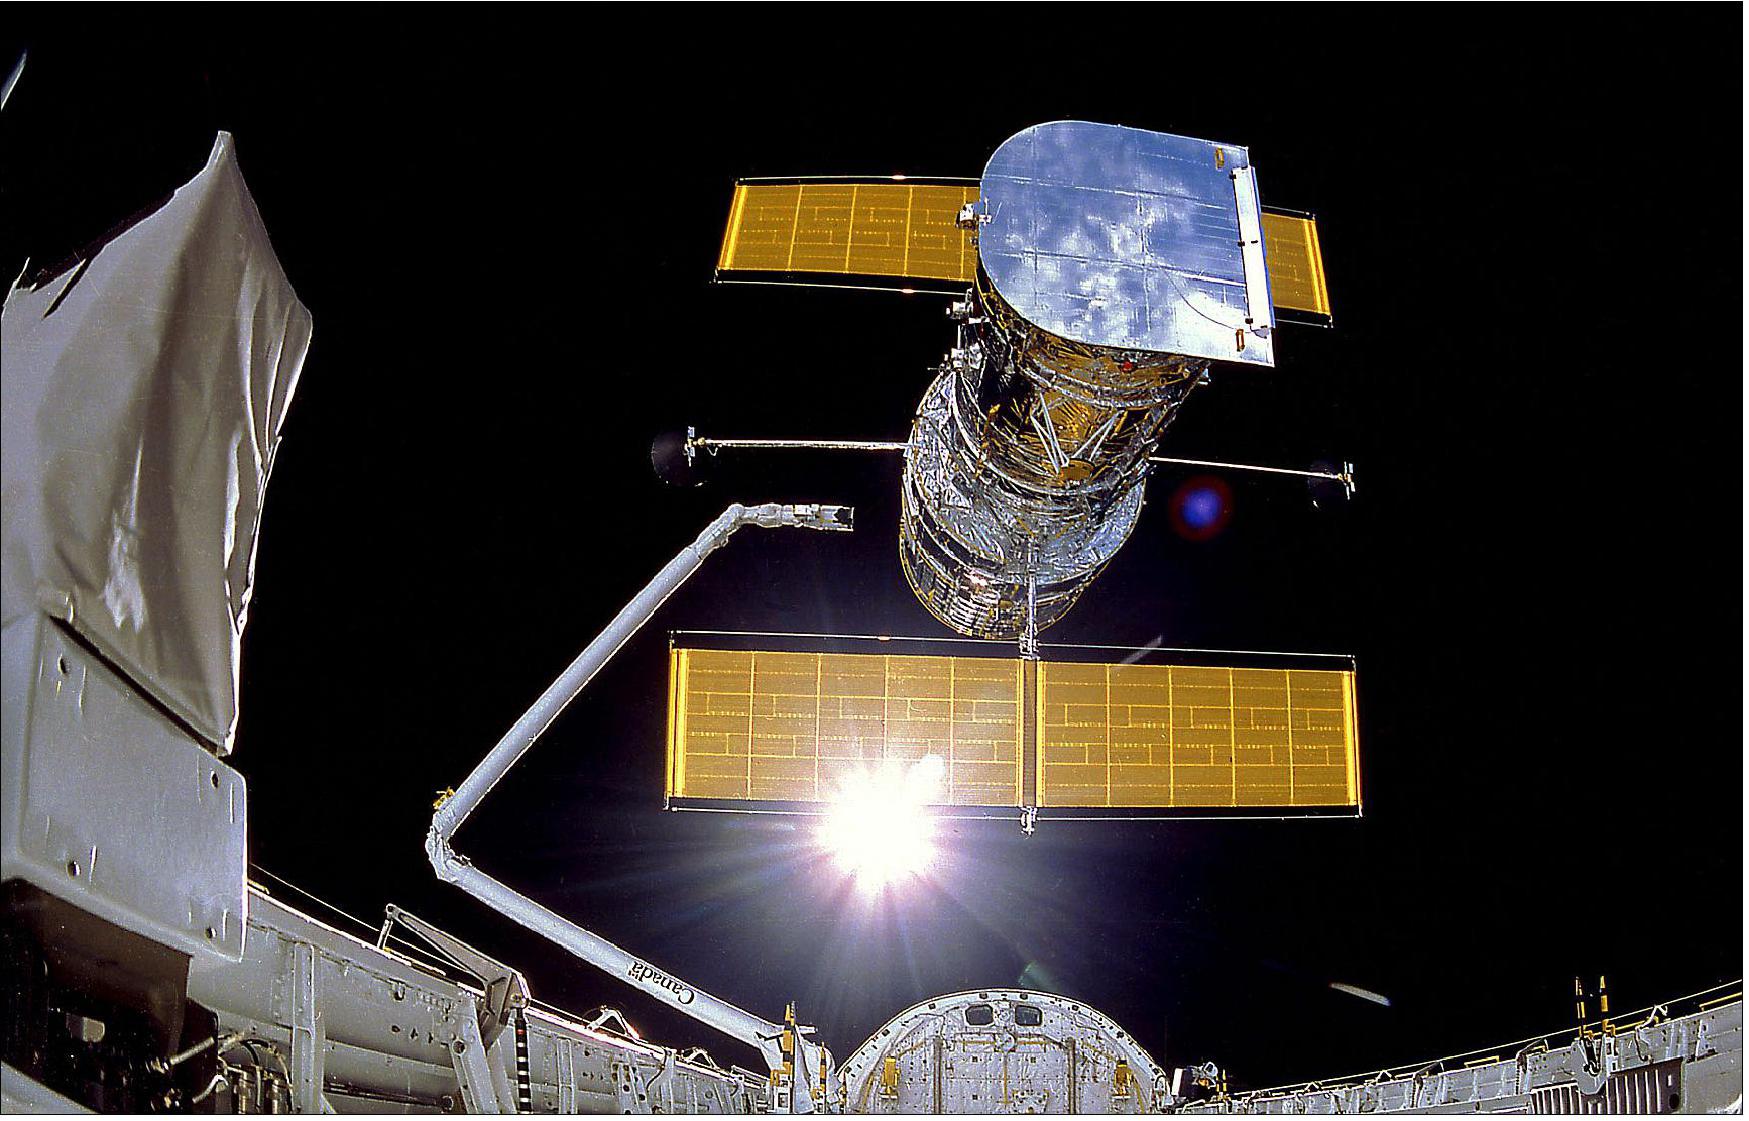 Figure 2: IMAX Cargo Bay Camera view of the Hubble Space Telescope at the moment of release, mission STS-31 in April 1990 (image credit: NASA)